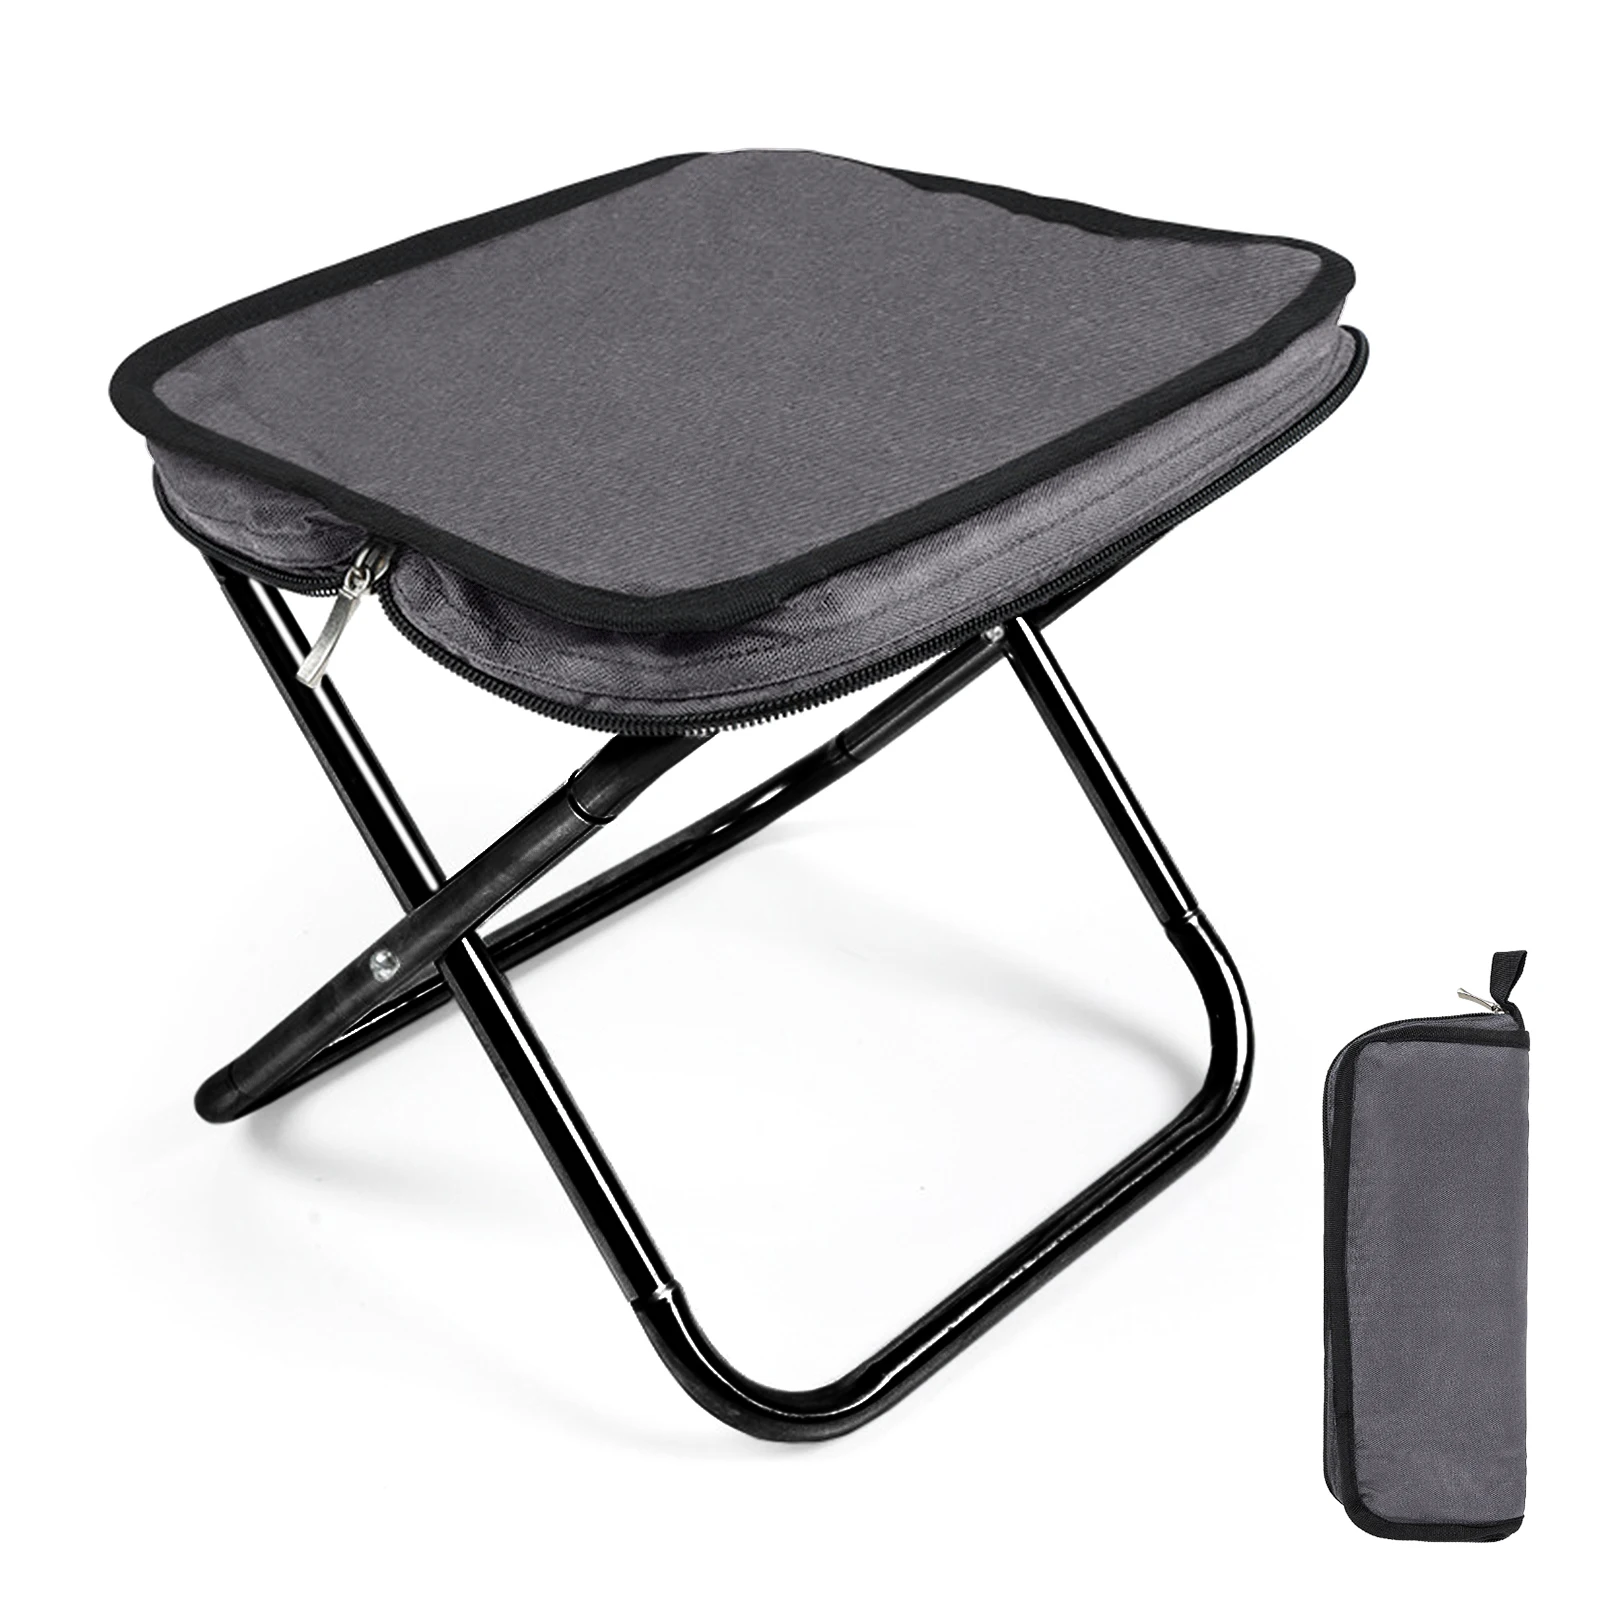 

Foldable Camping Stool Fishing Chair Portable Folding Stool With Storage Bag for Hiking Hunting Traveling Ultralight Bench